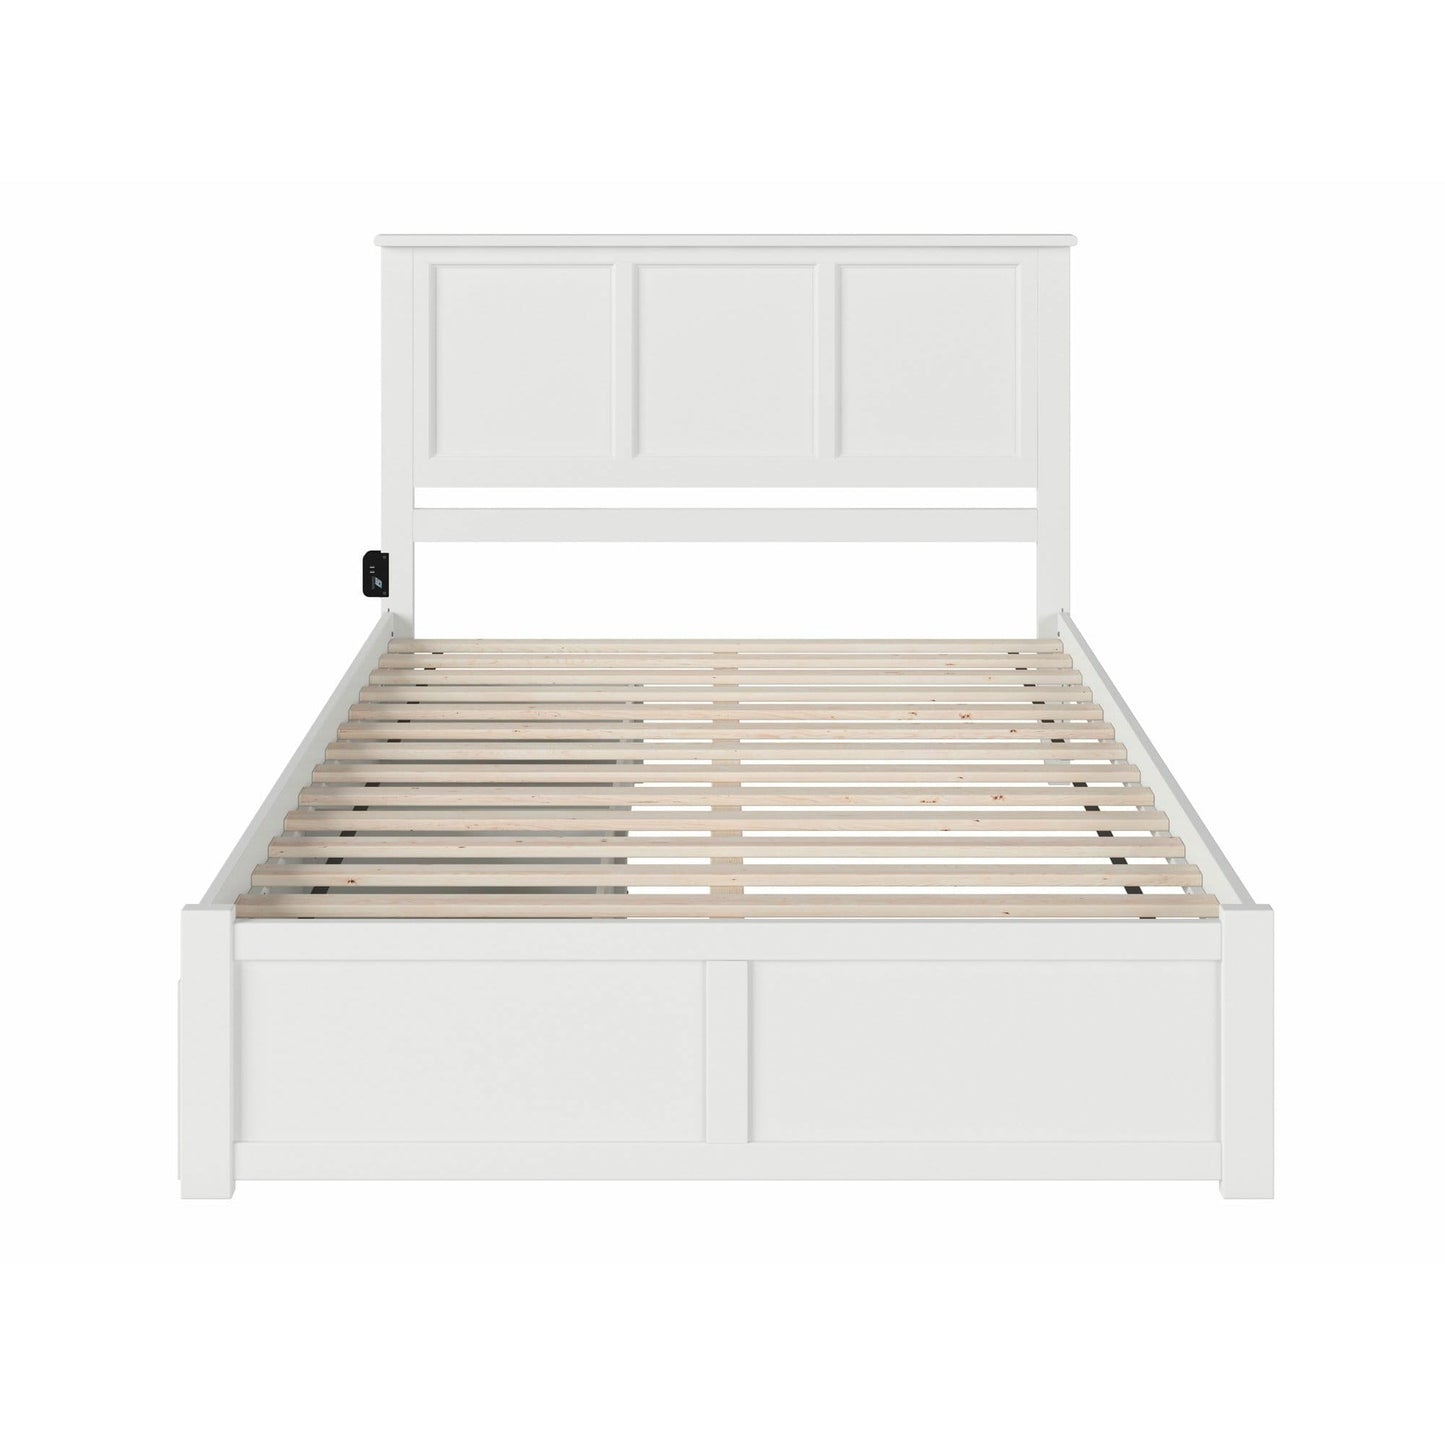 Atlantic Furniture Bed Madison Queen Platform Bed with Flat Panel Foot Board and 2 Urban Bed Drawers in Espresso